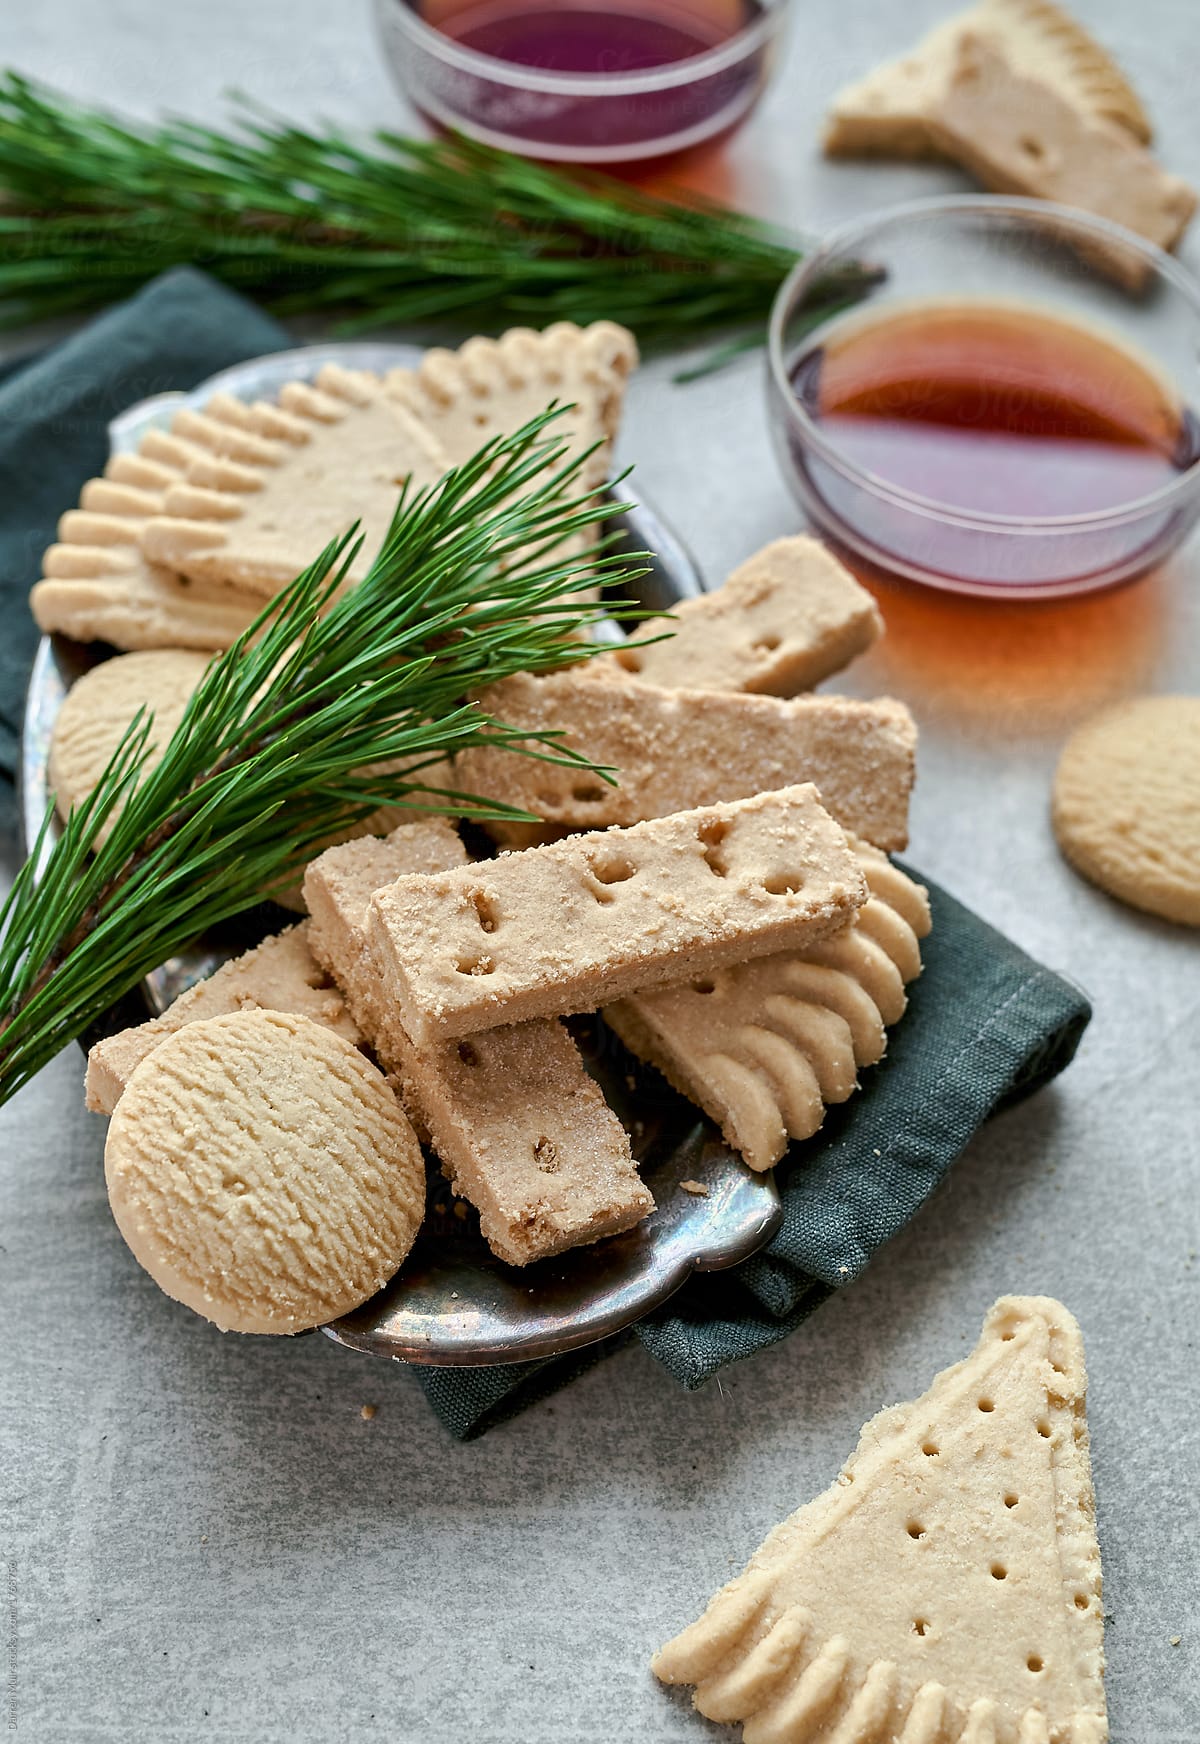 Shortbread Traditional Scottish Shortbread Cookies For Christmas Or The New Year By Darren Muir Scottish Shortbread Stocksy United